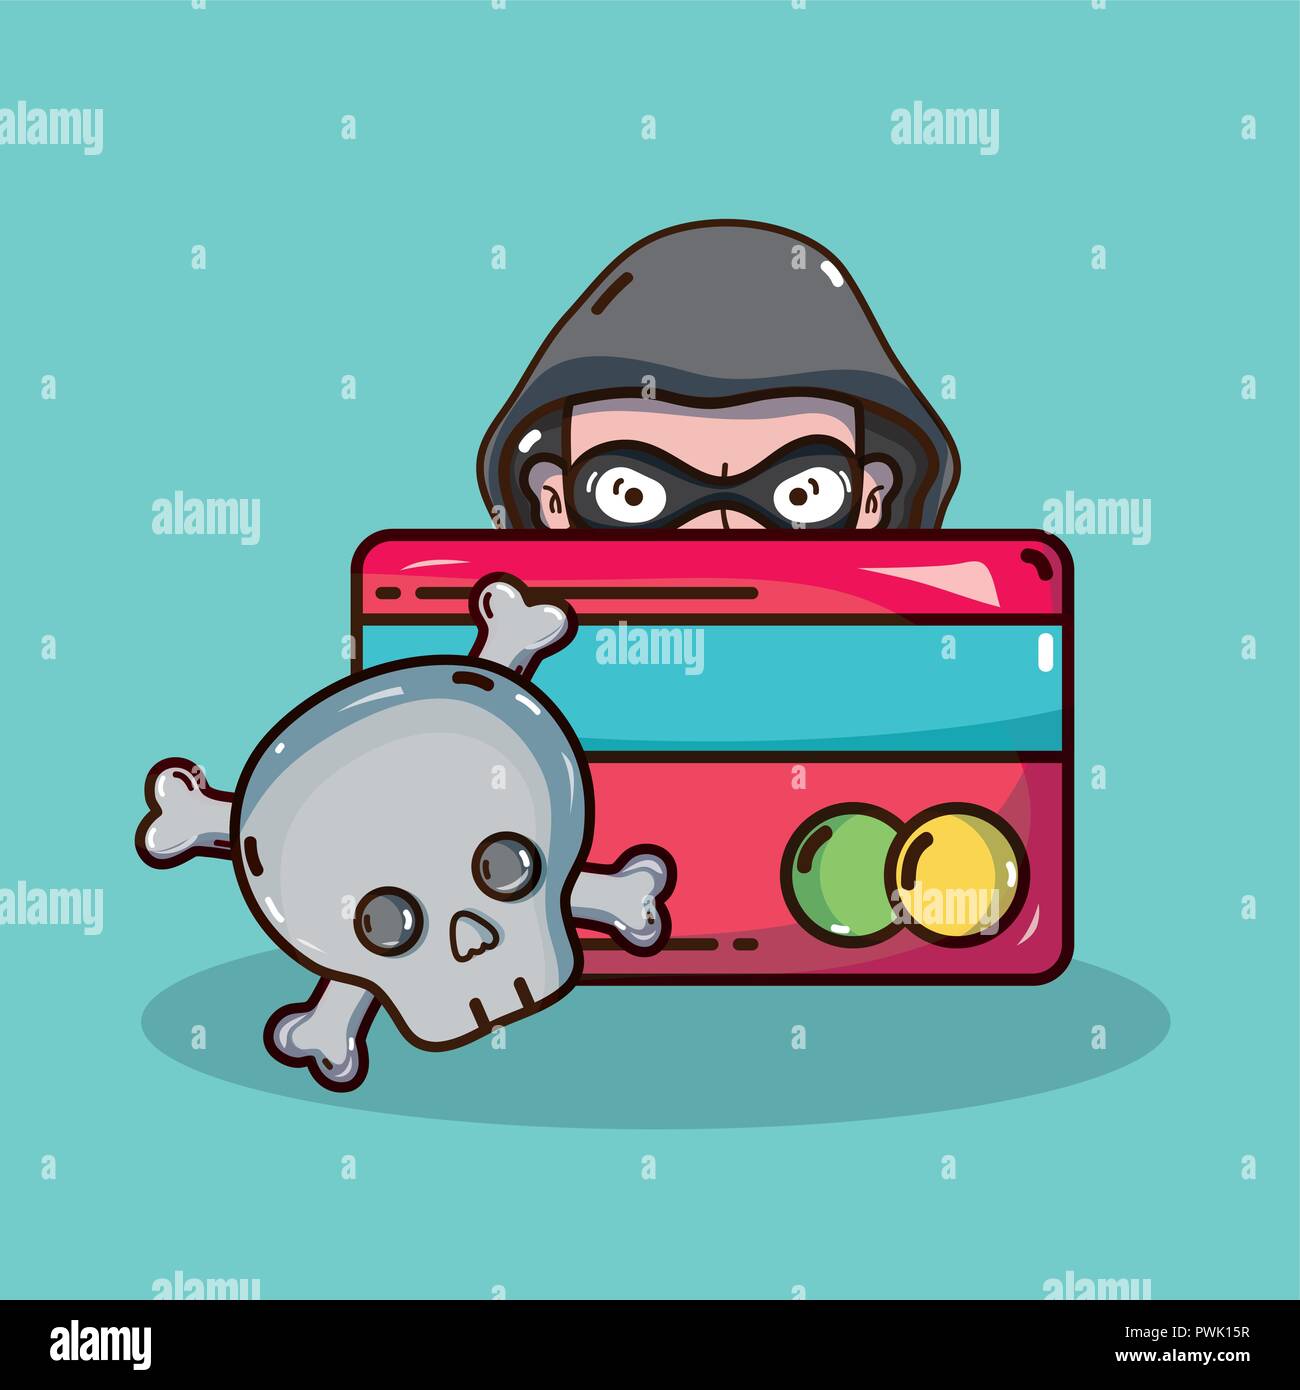 Hacker and security system technology Stock Vector